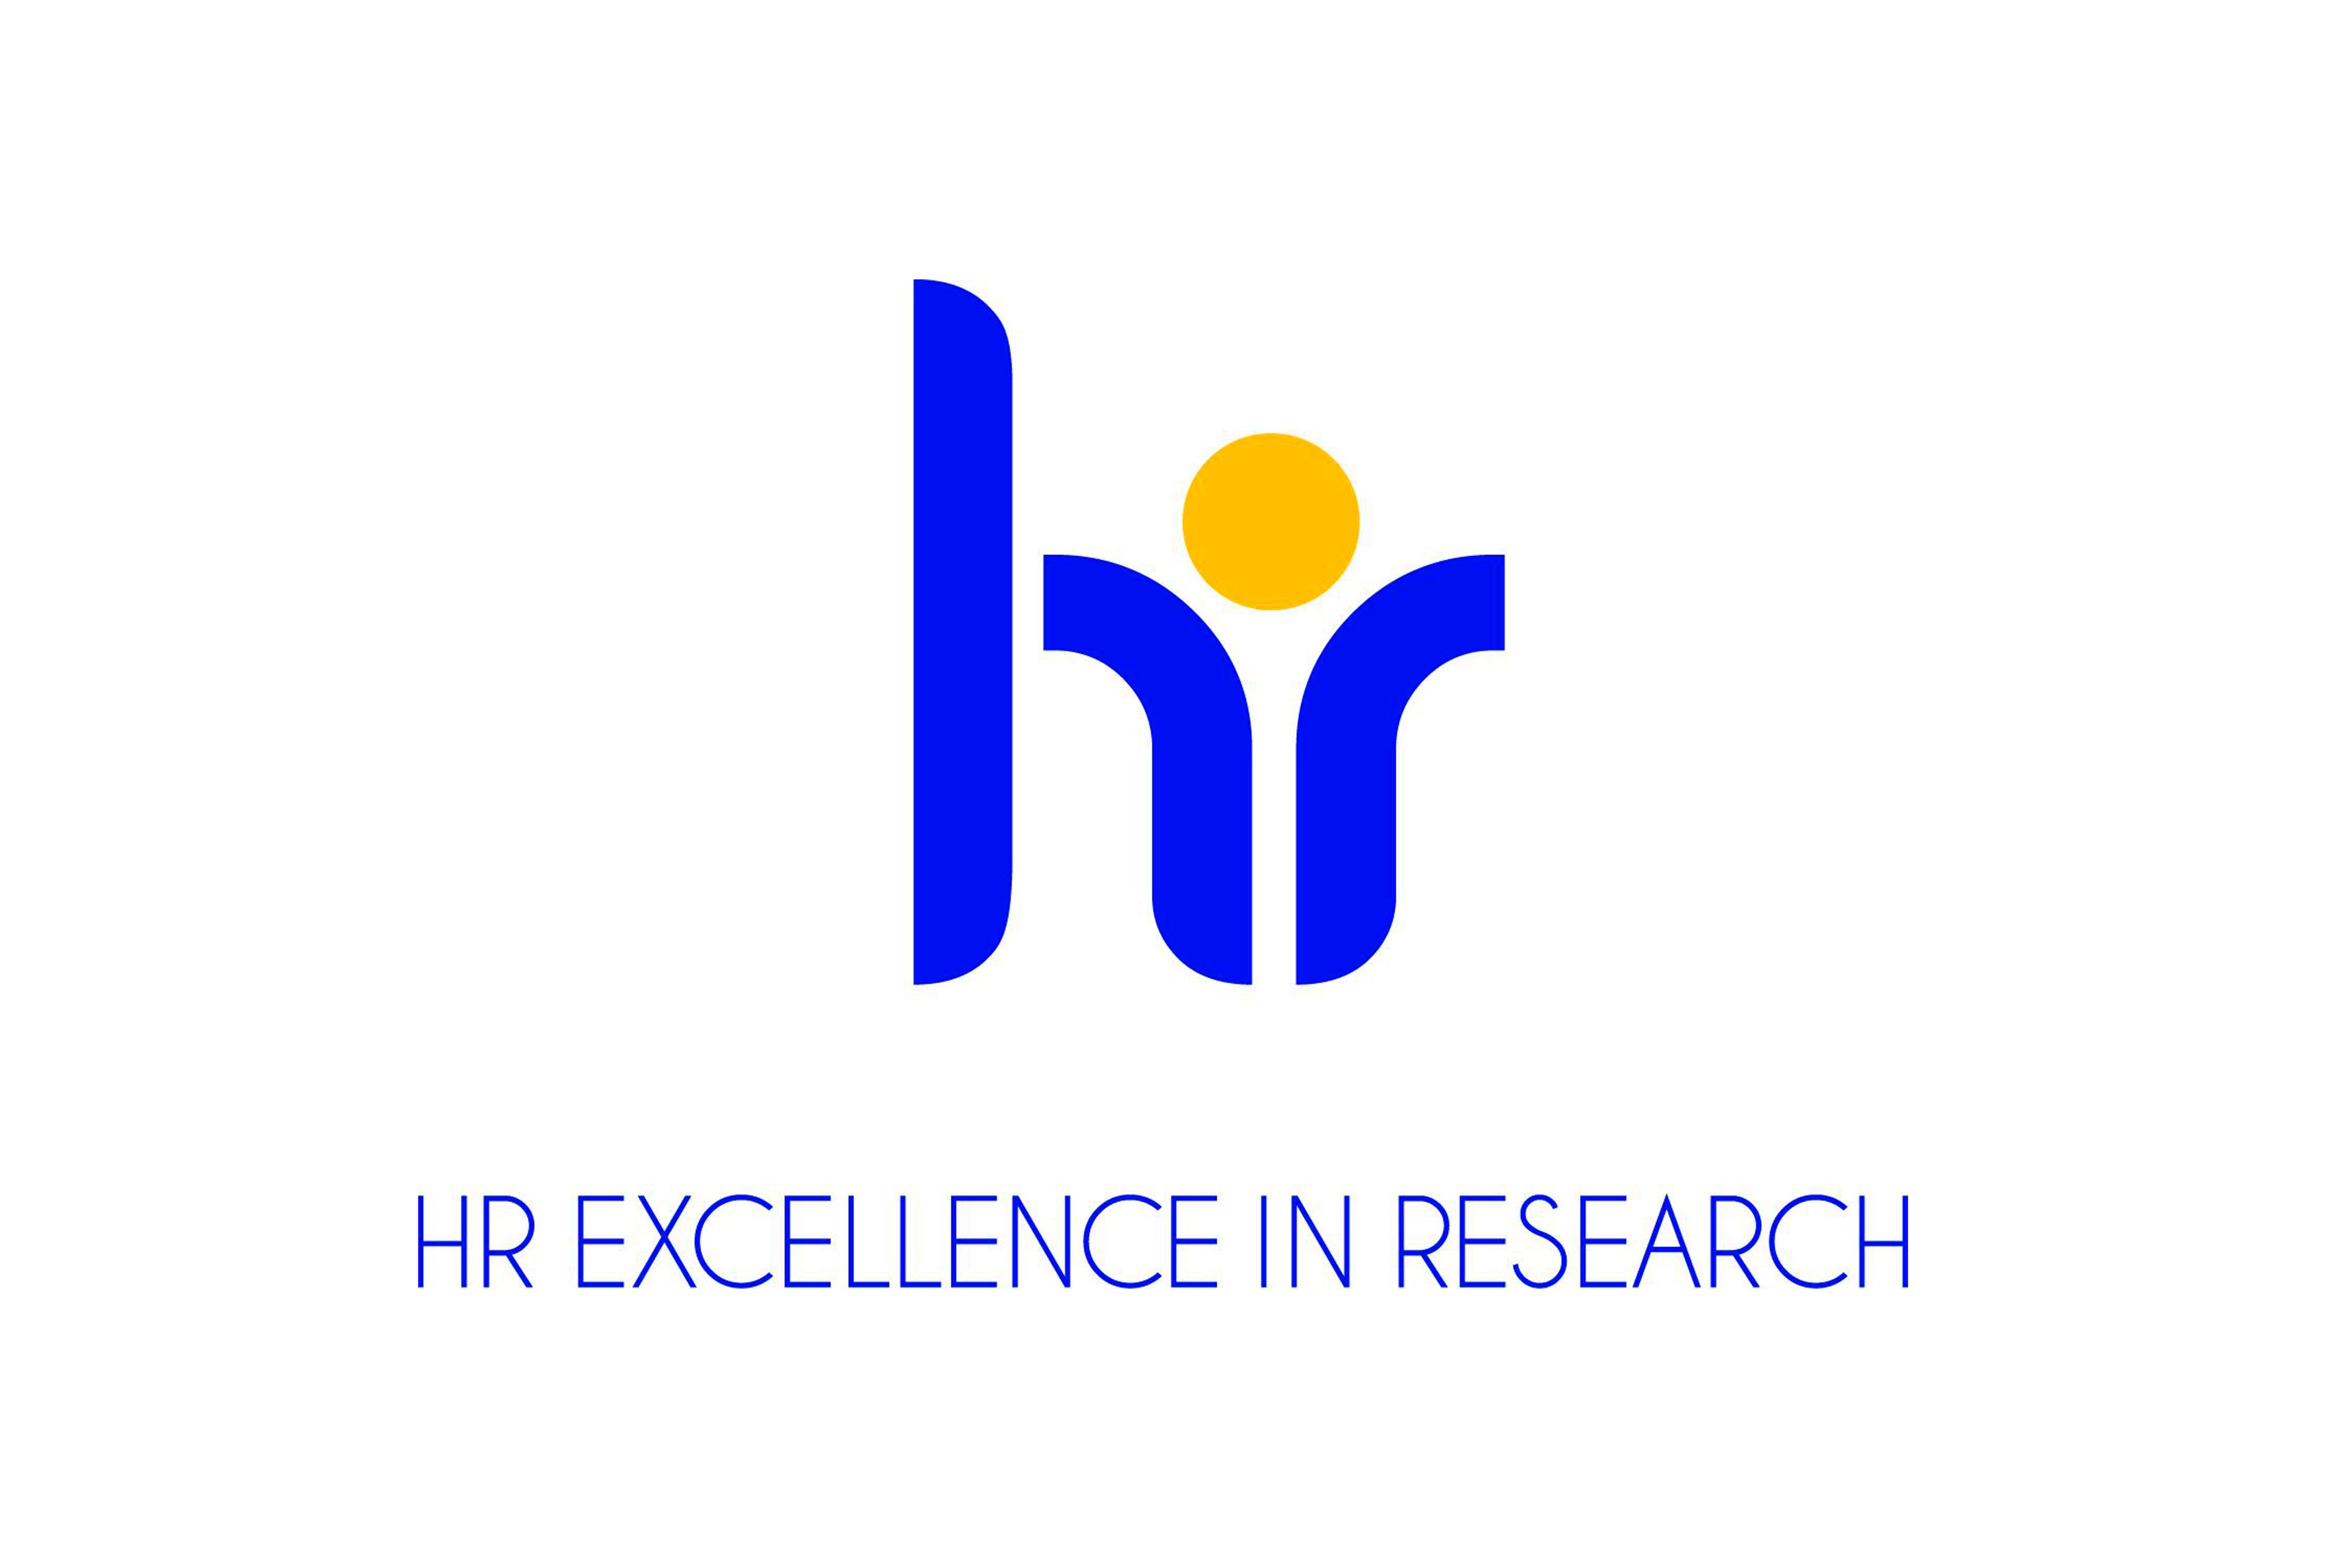 Blanquerna starts the process to get the HR Excellence in Research quality award